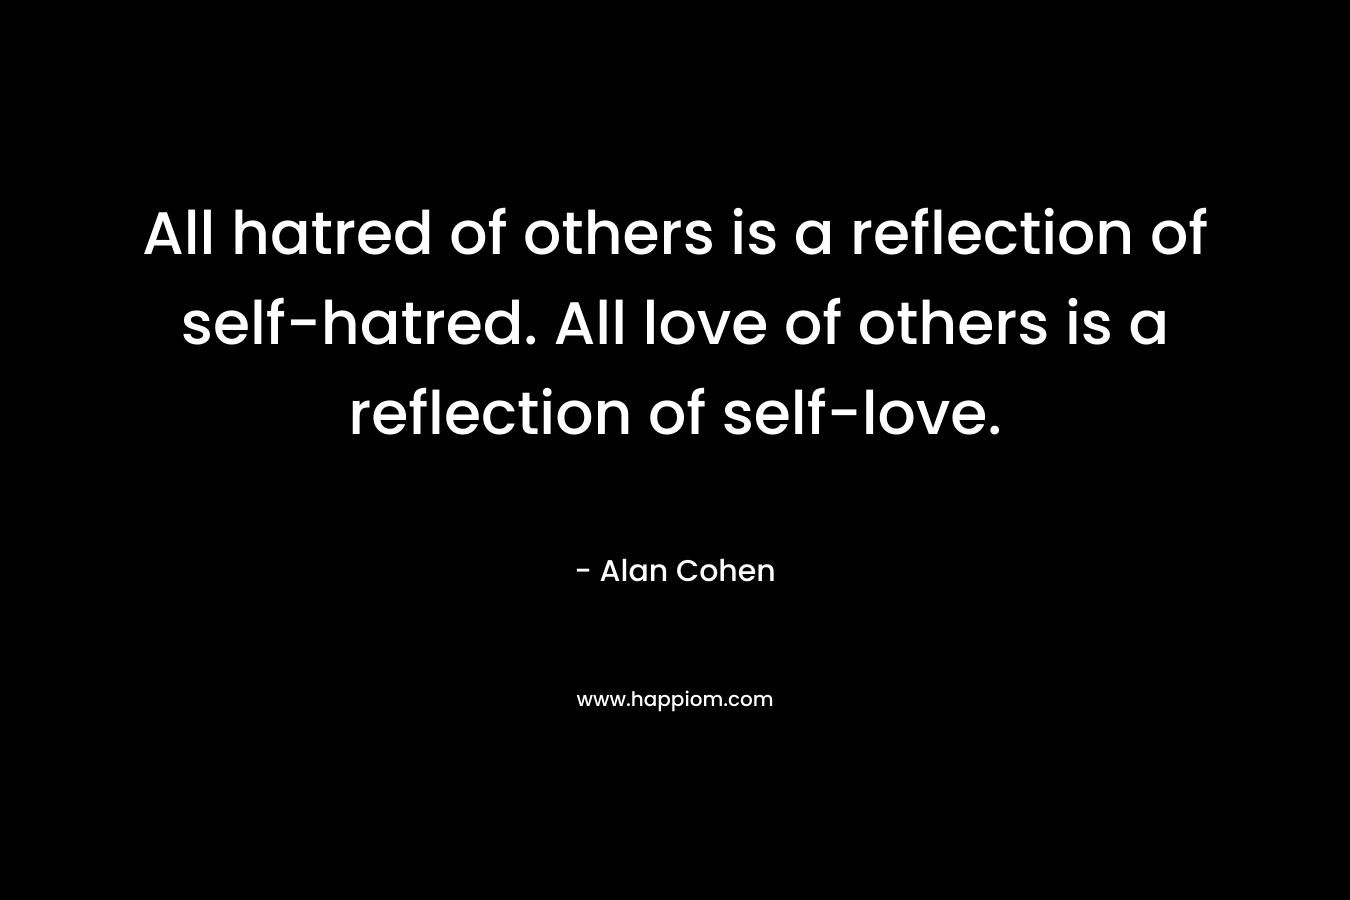 All hatred of others is a reflection of self-hatred. All love of others is a reflection of self-love.